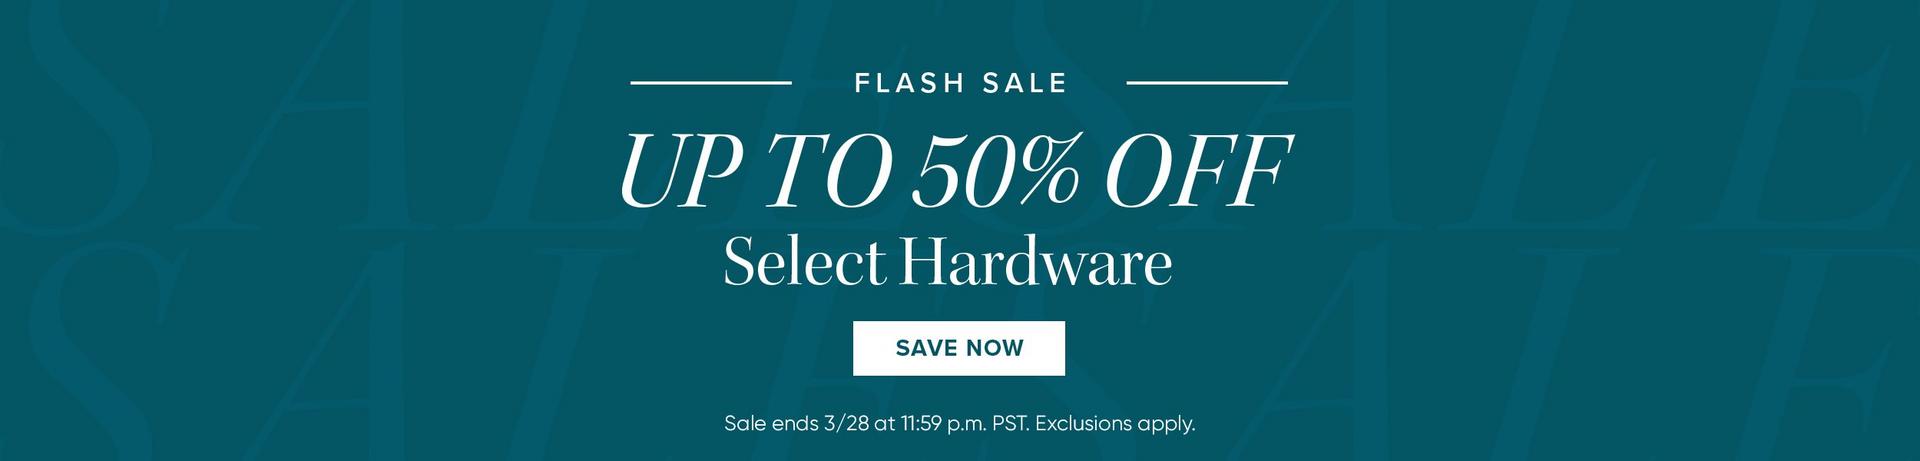 Flash Sale - Up to 50% Off Select Hardware, Save Now